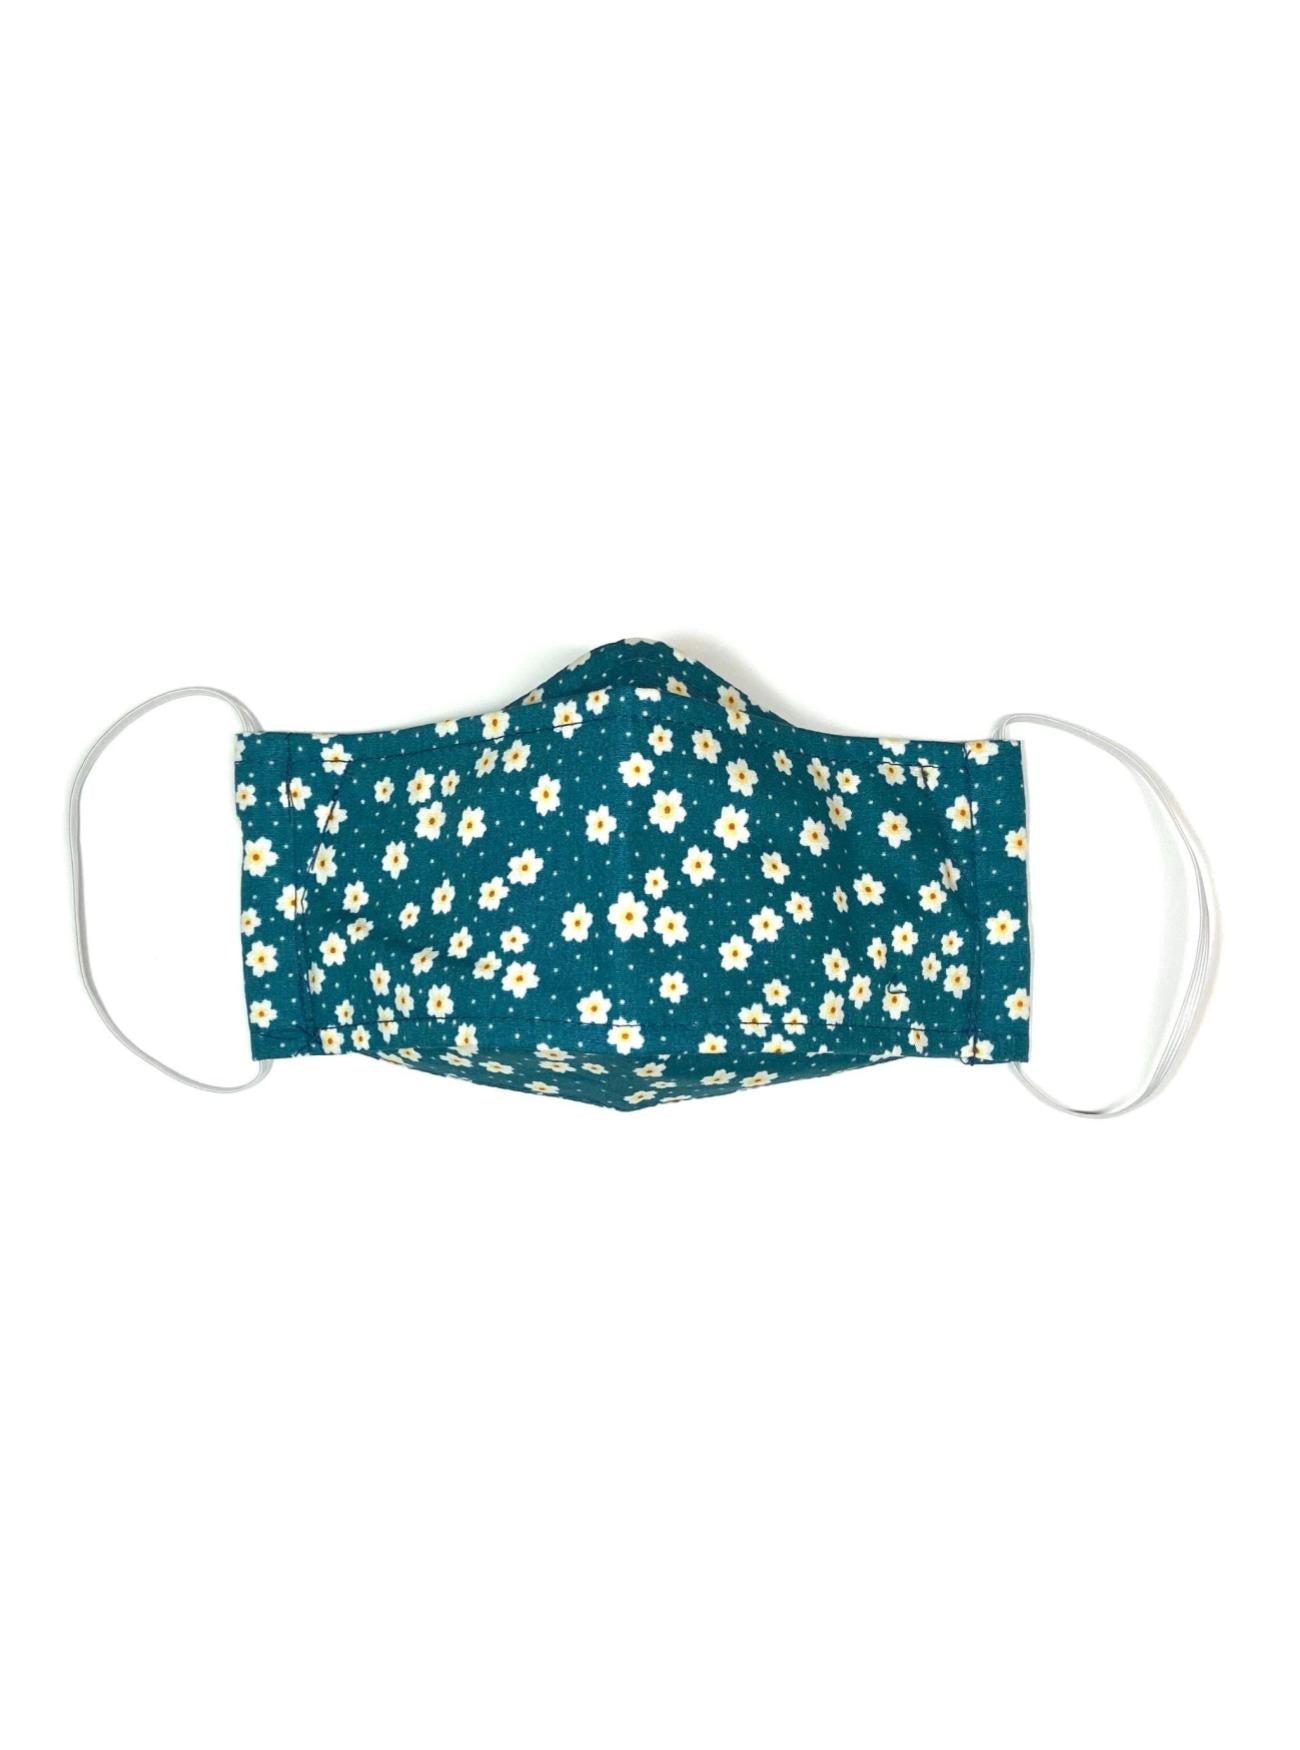 Teal Blue Floral, Reusable Face Mask [3-layers]